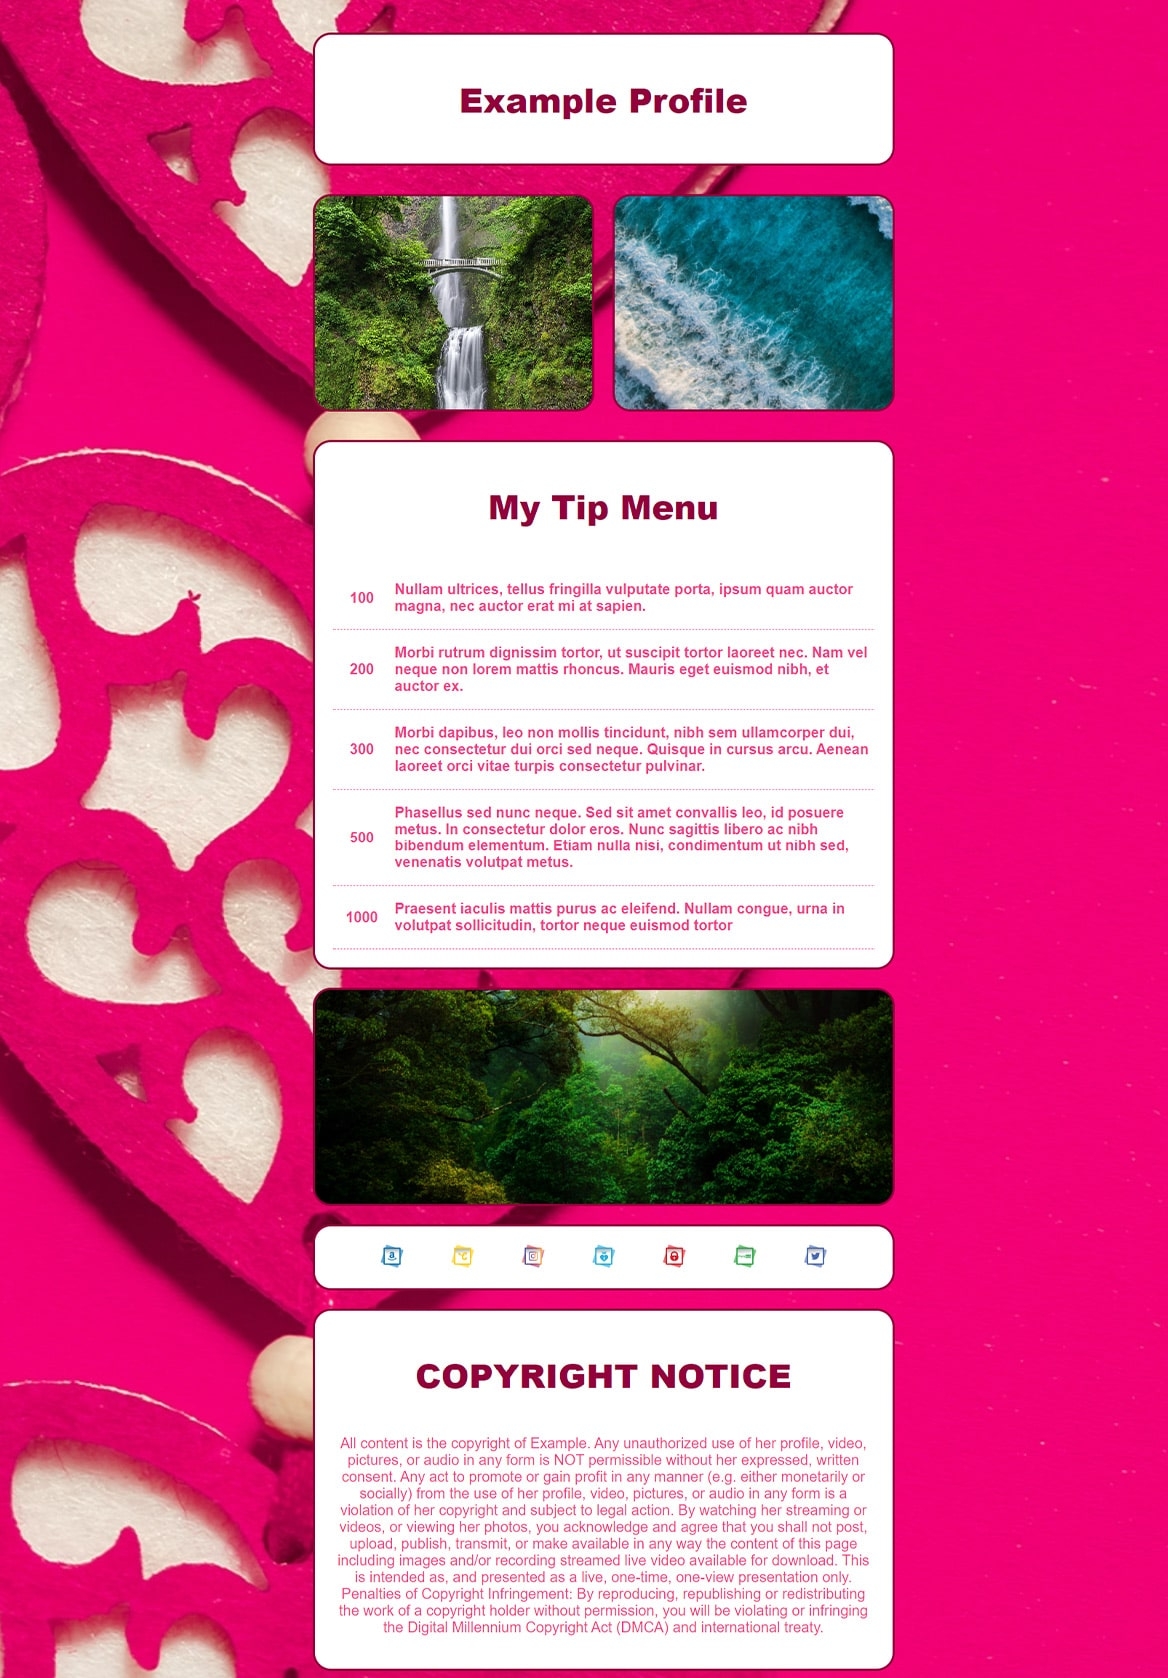 Lovers Romance theme on pink background with hearts